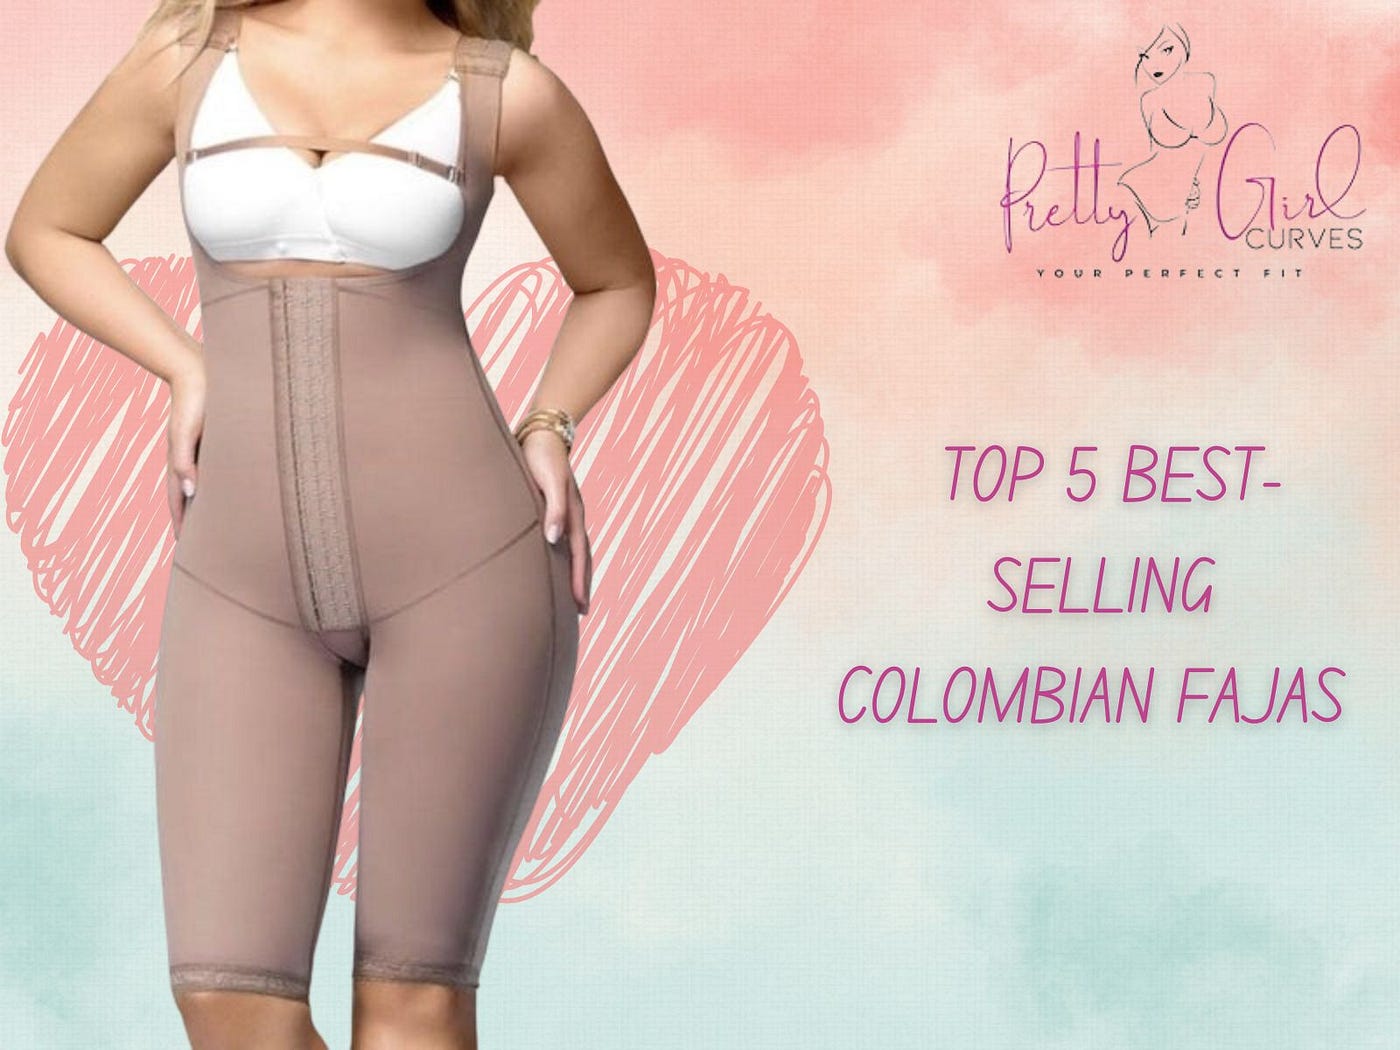 Choose the best Colombian faja for your body type 